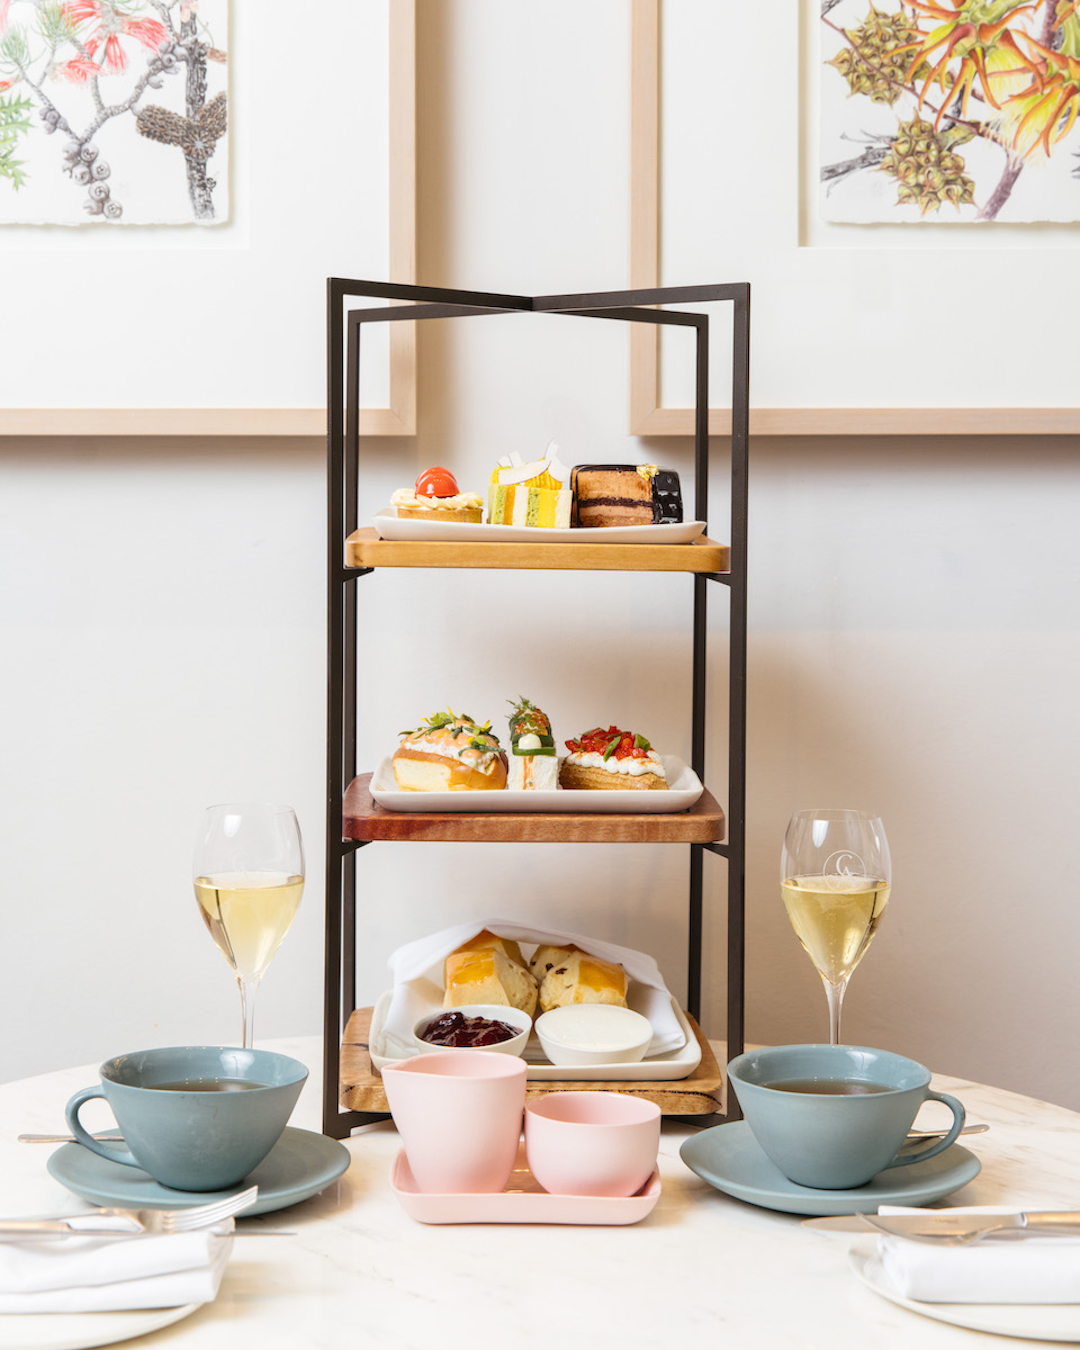 A beautiful afternoon tea at Cape Arid Rooms in Perth's CBD